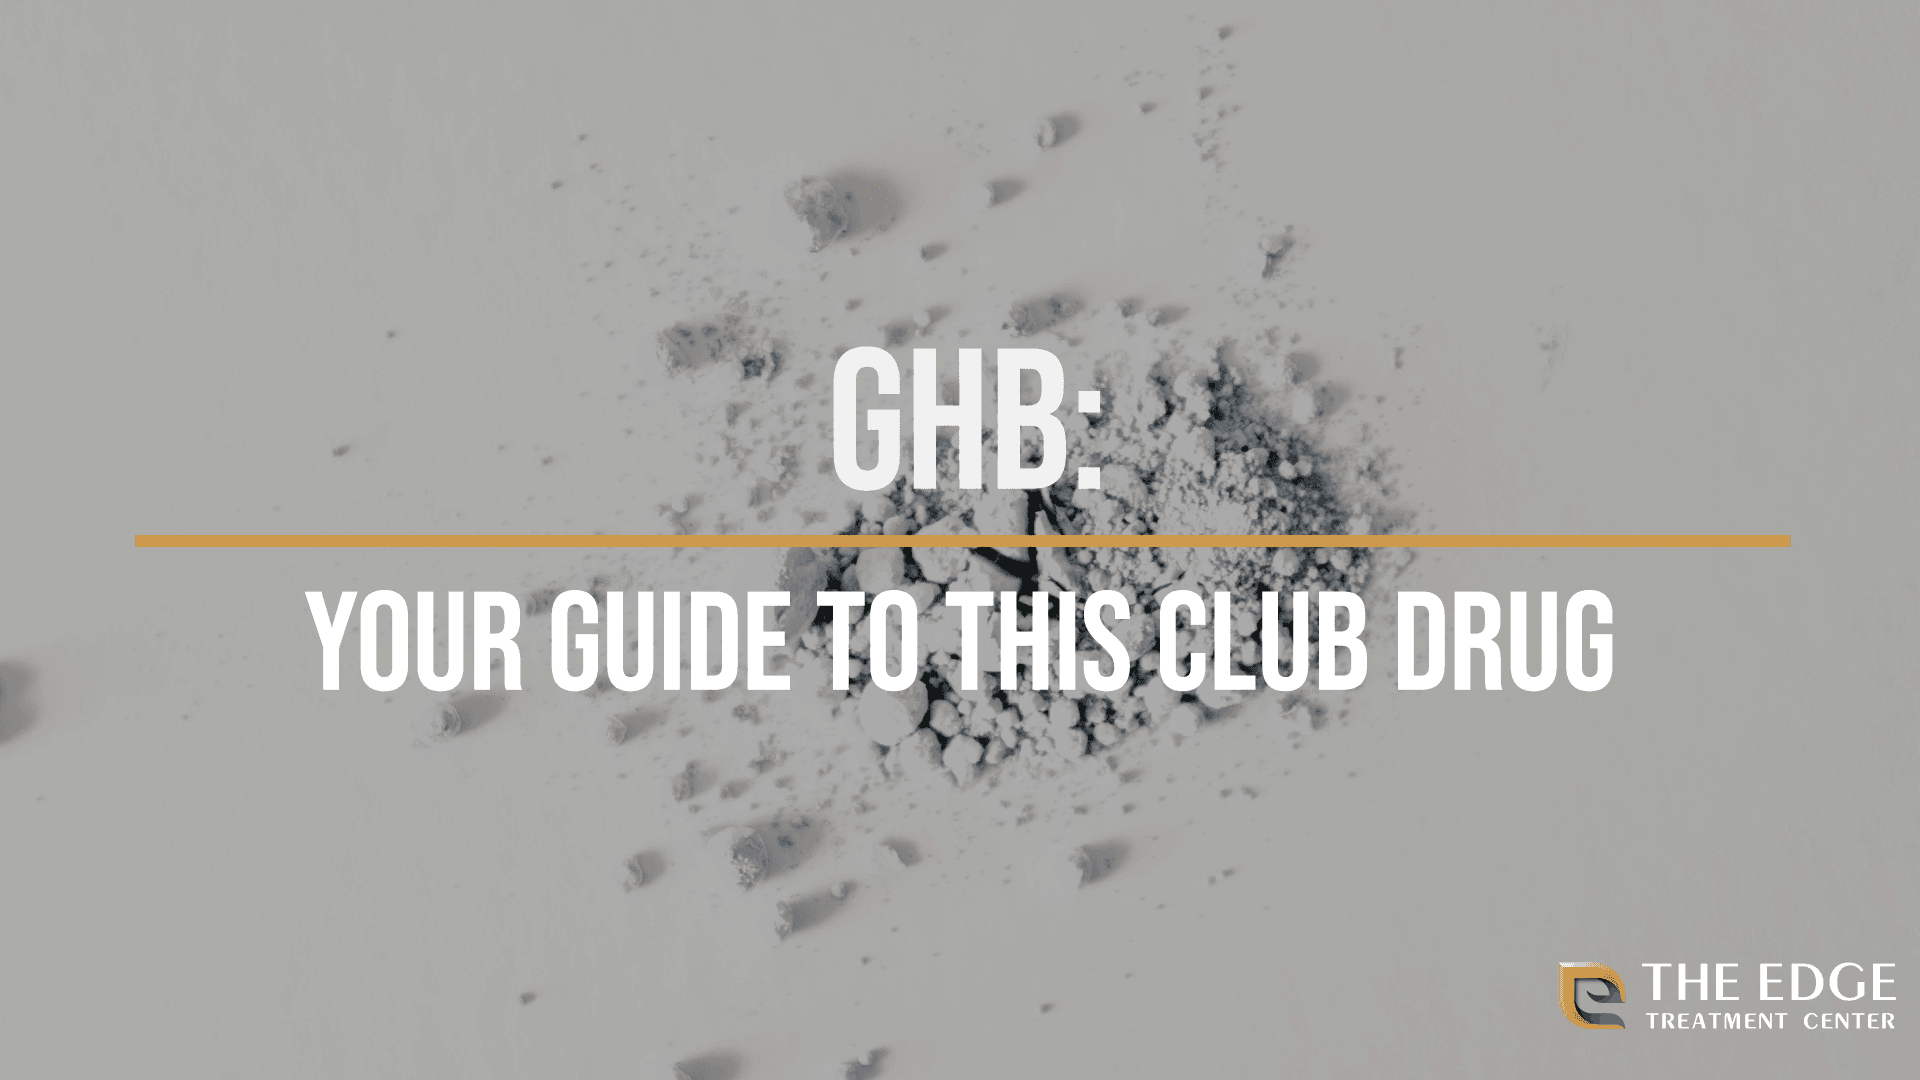 GHB: What is GHB?